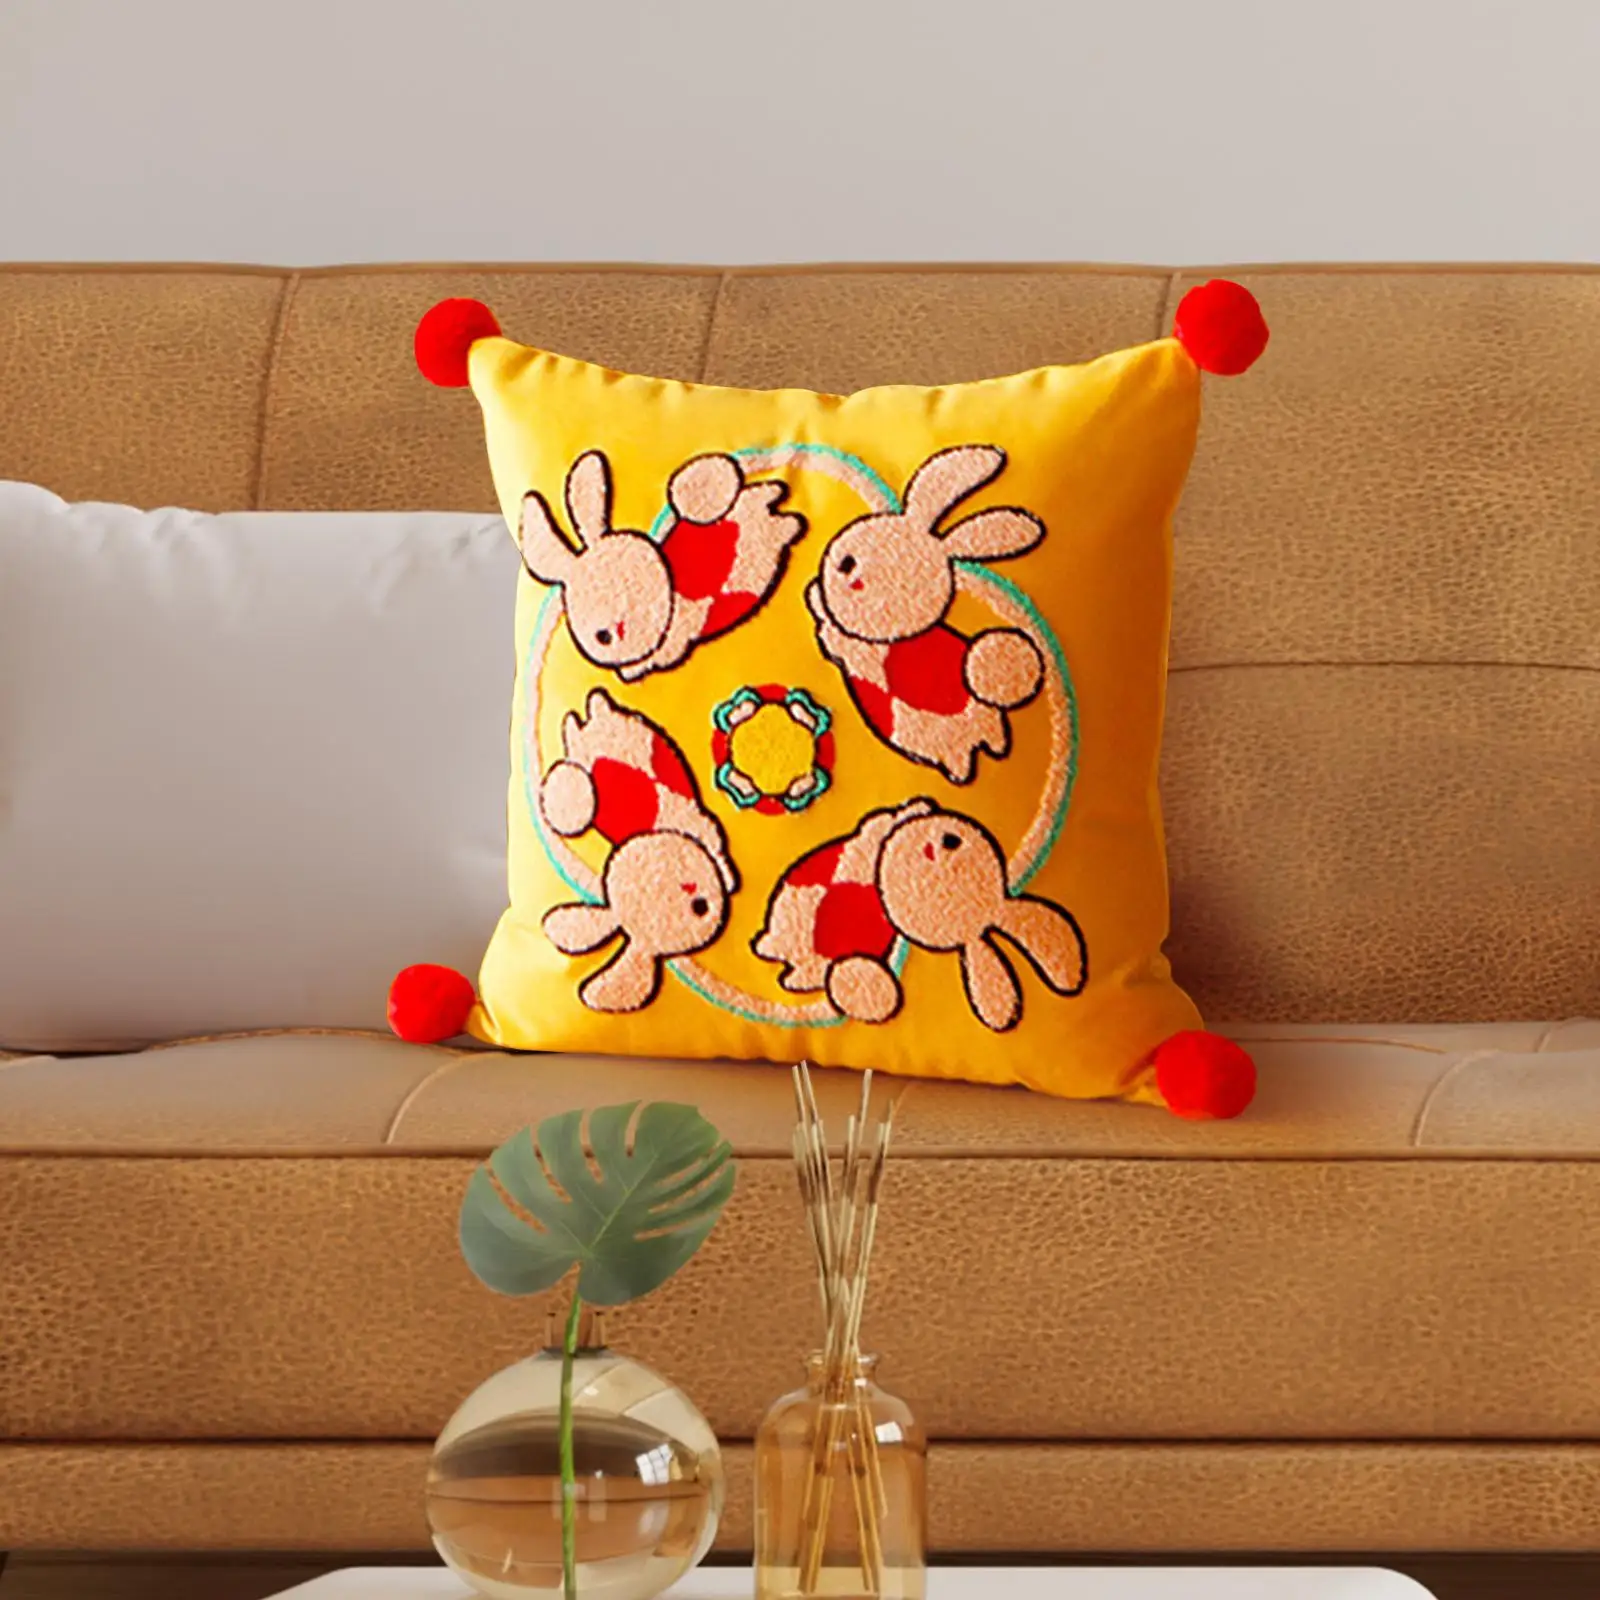 Embroidered Cushion Cover Decorative Throw Pillow Case for Holiday Bedding